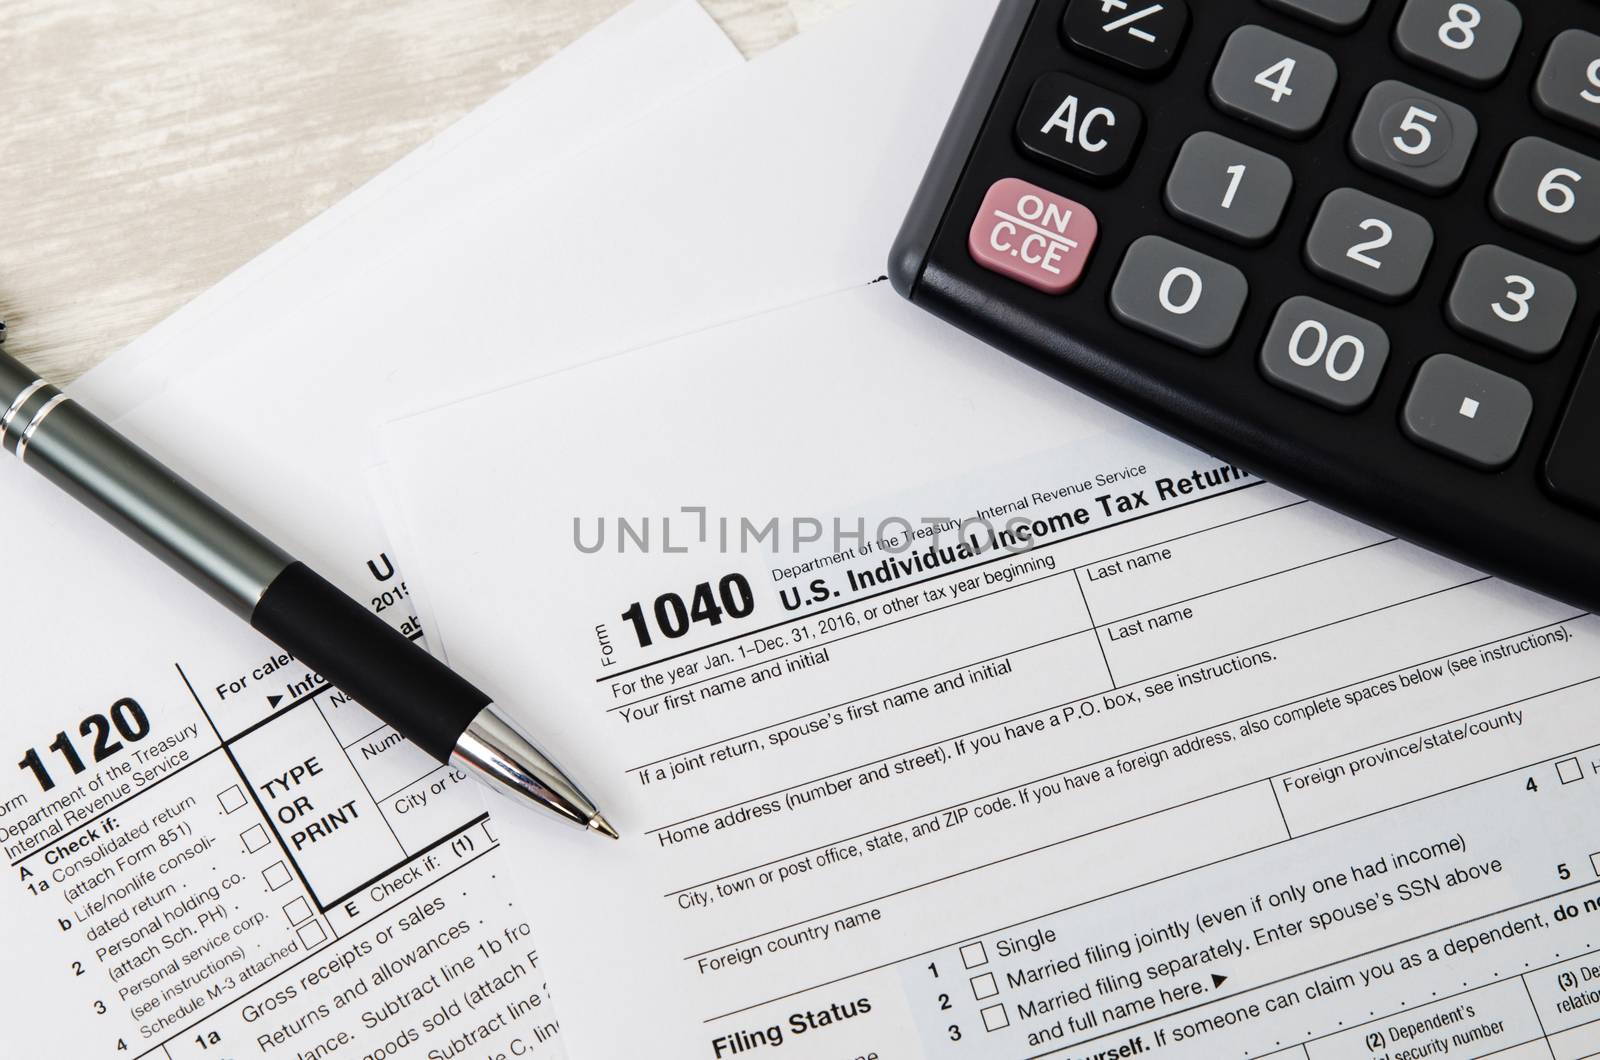 US tax form 1040 with pen and calculator. by simpson33